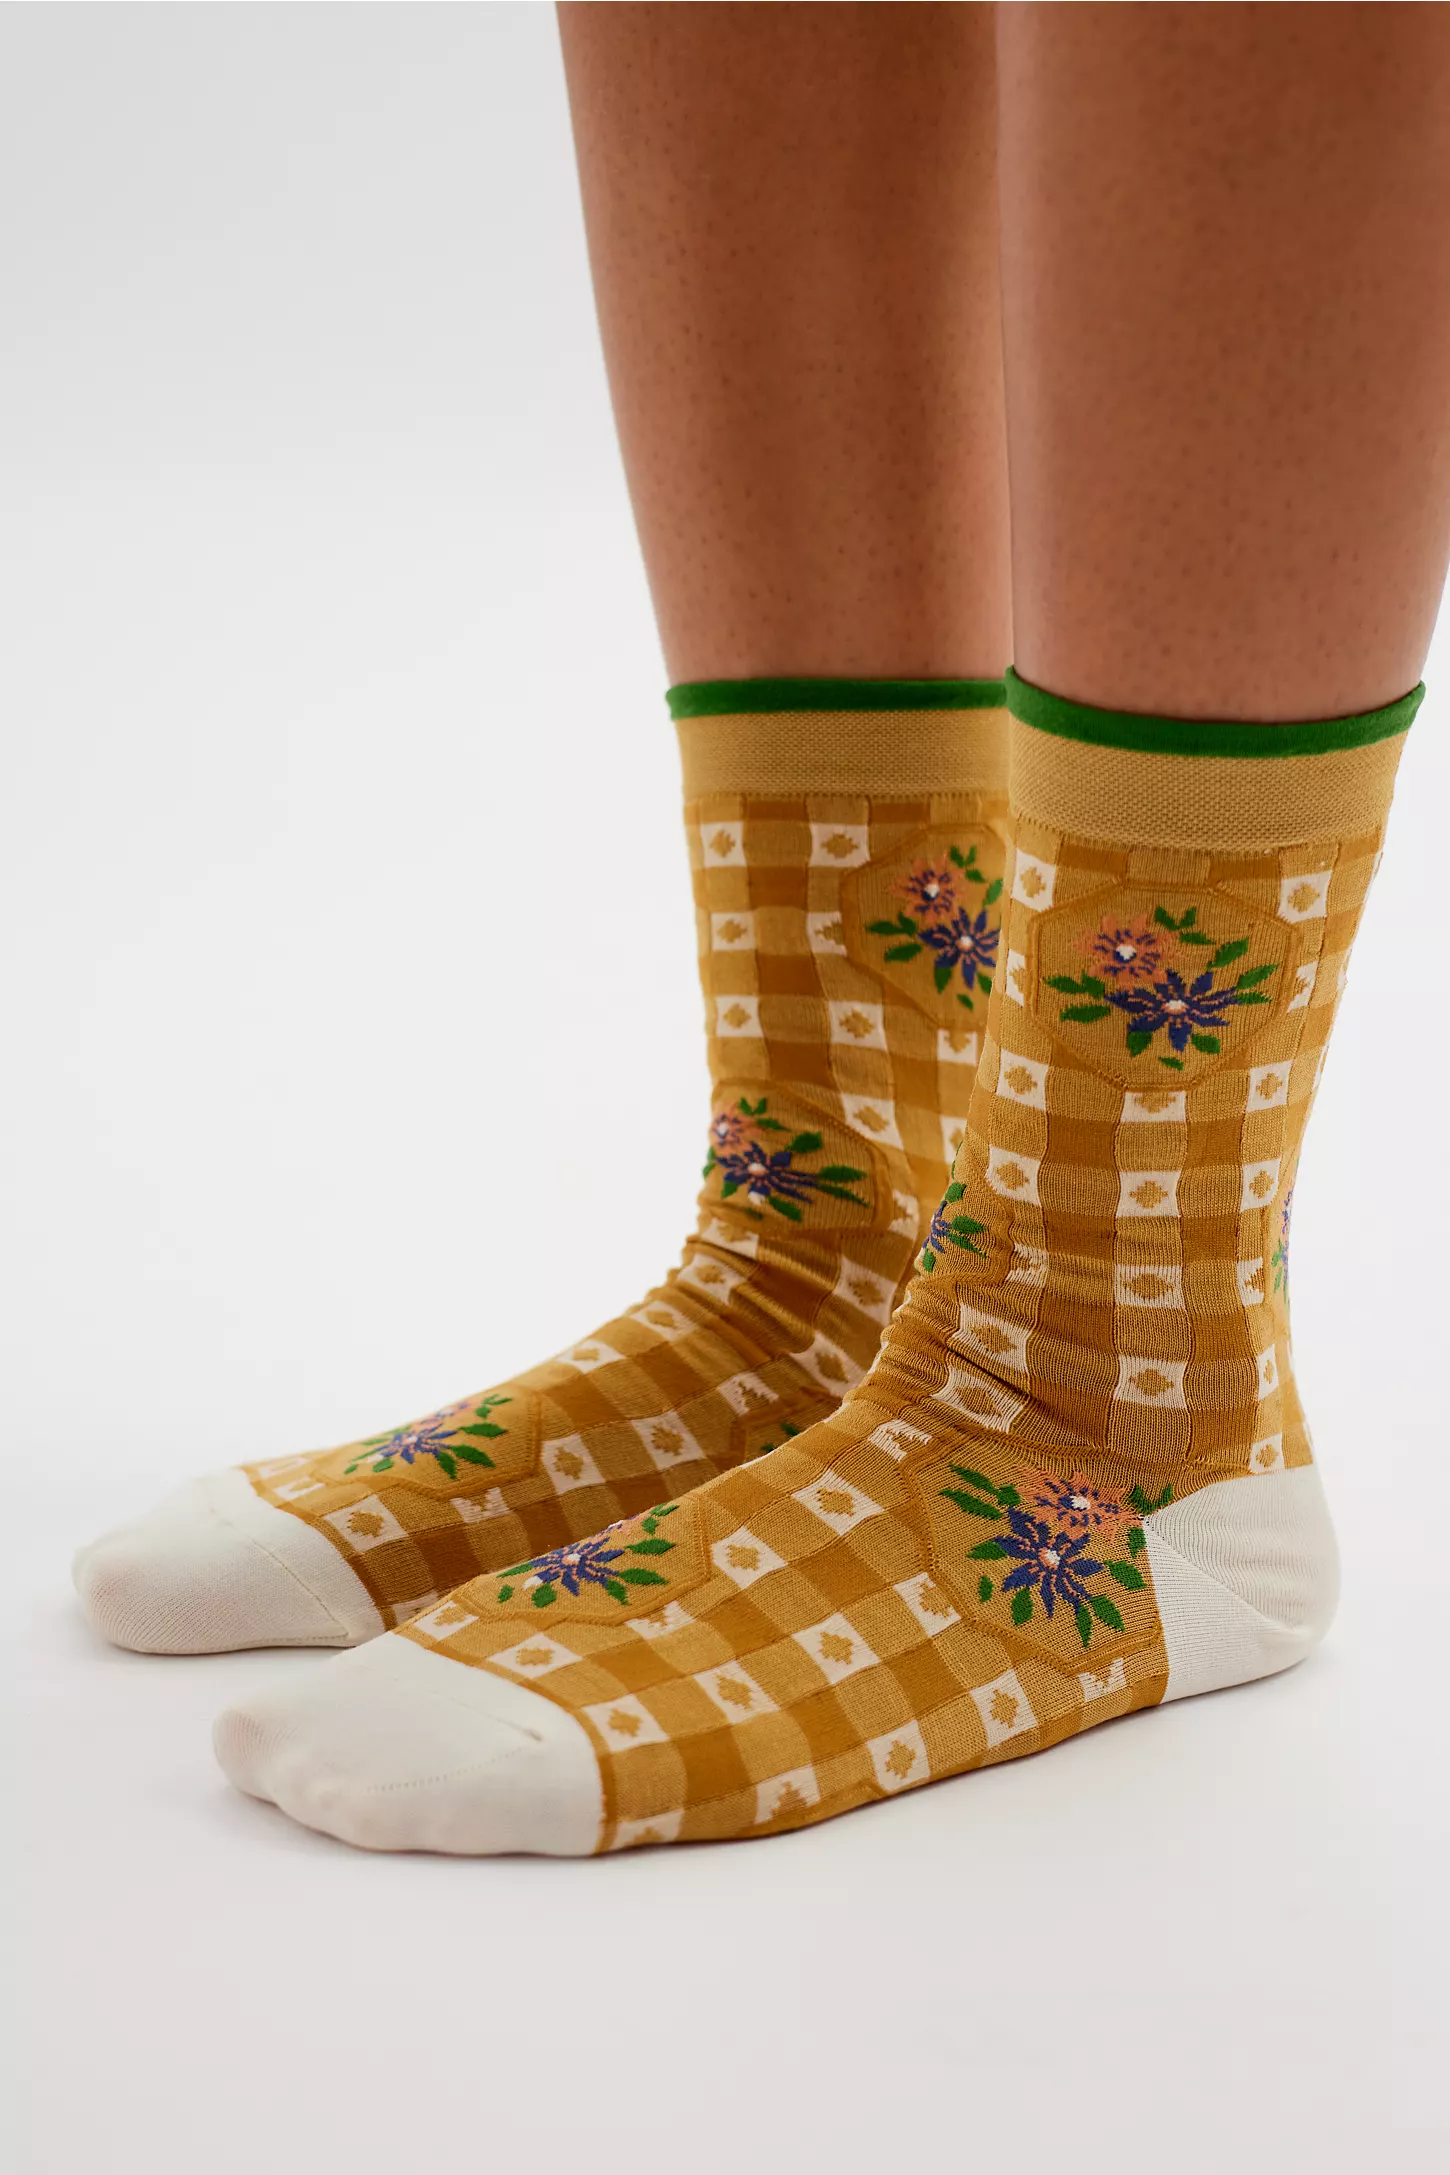 al fresco socks being worn. YOu can see the plaid and flower detailing. 